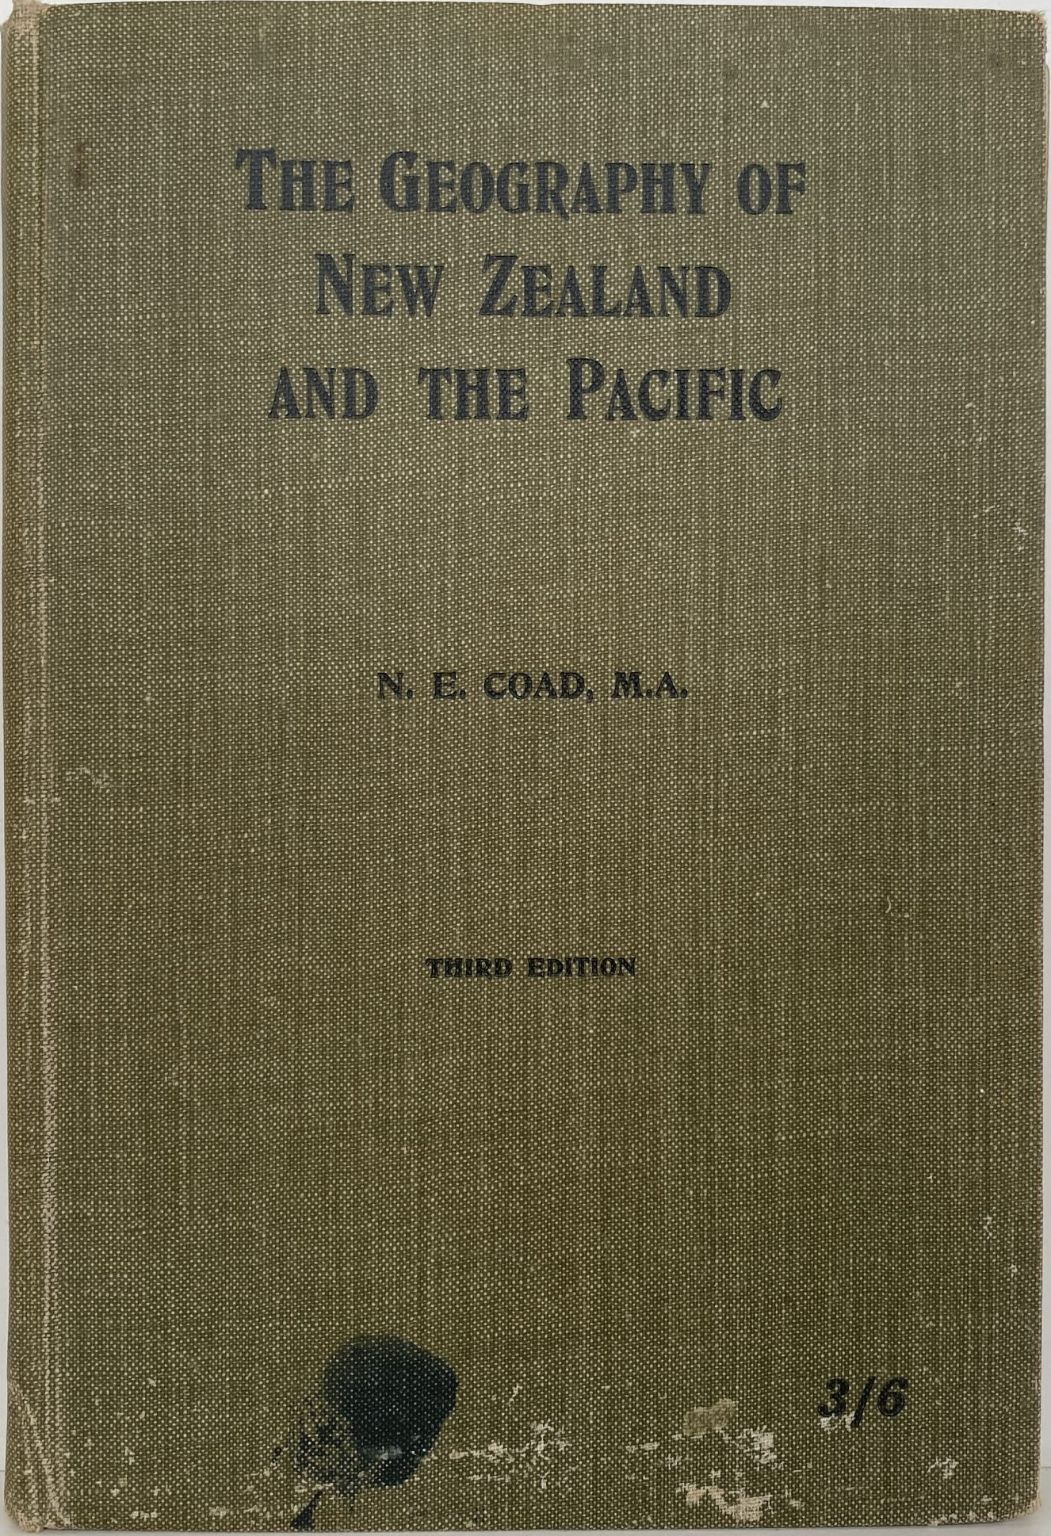 The Geography of New Zealand Australia the Pacific